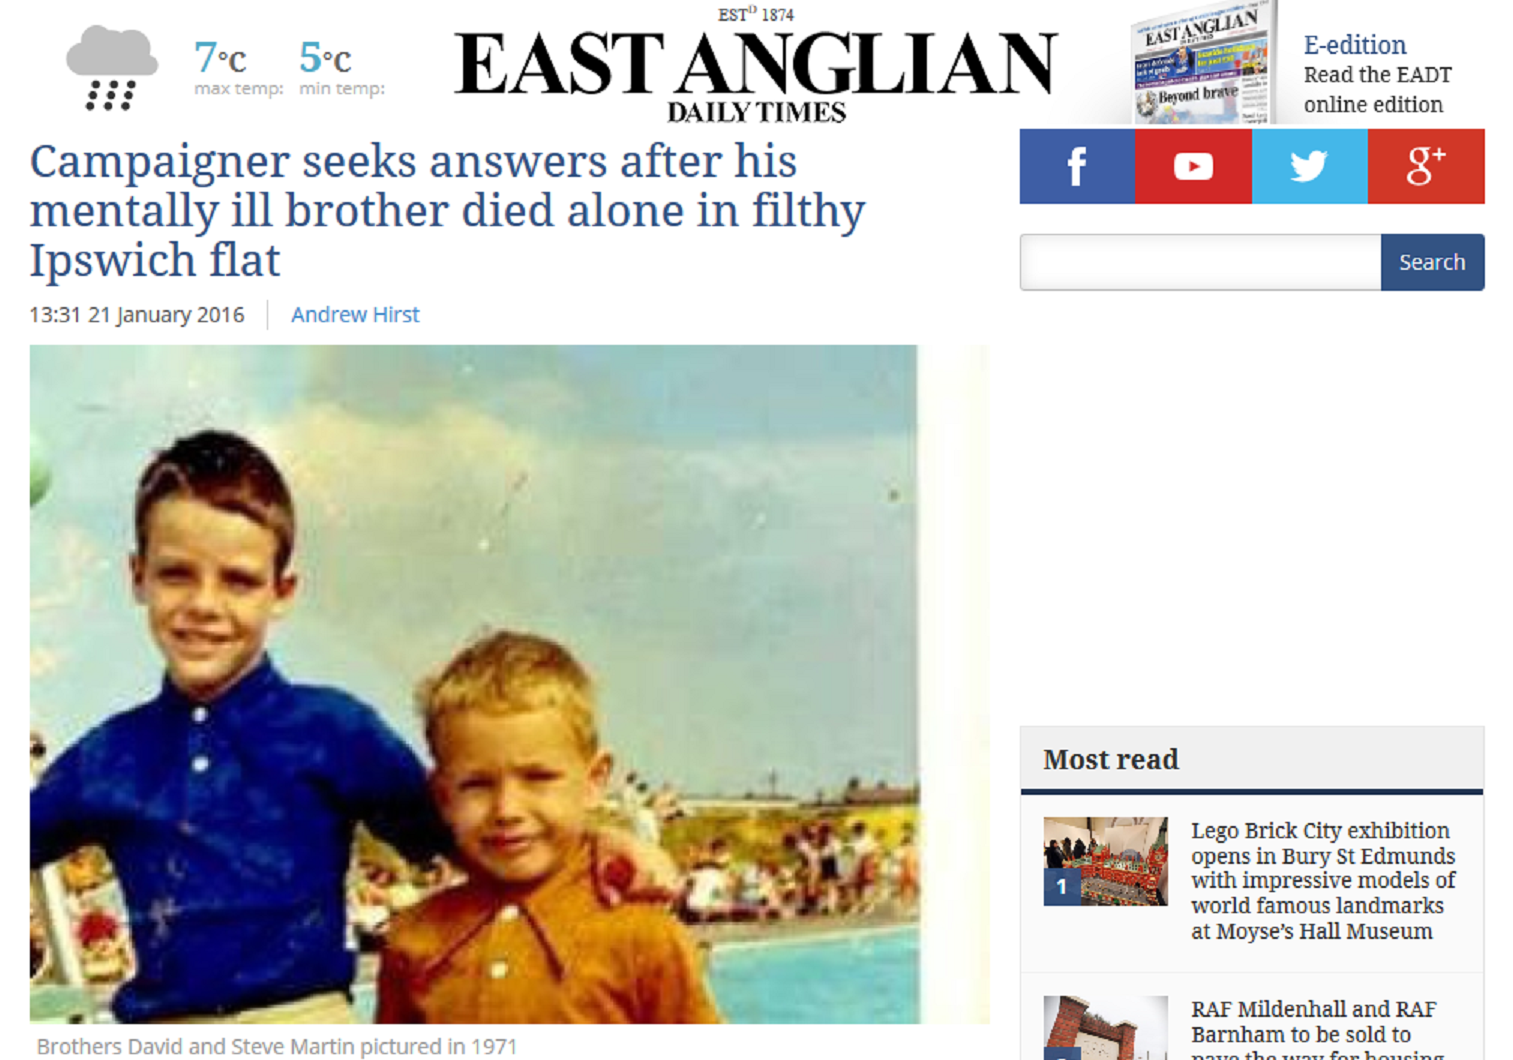 EADT Campaigner seeks answers after his mentally ill brother died alone in filthy Ipswich flat